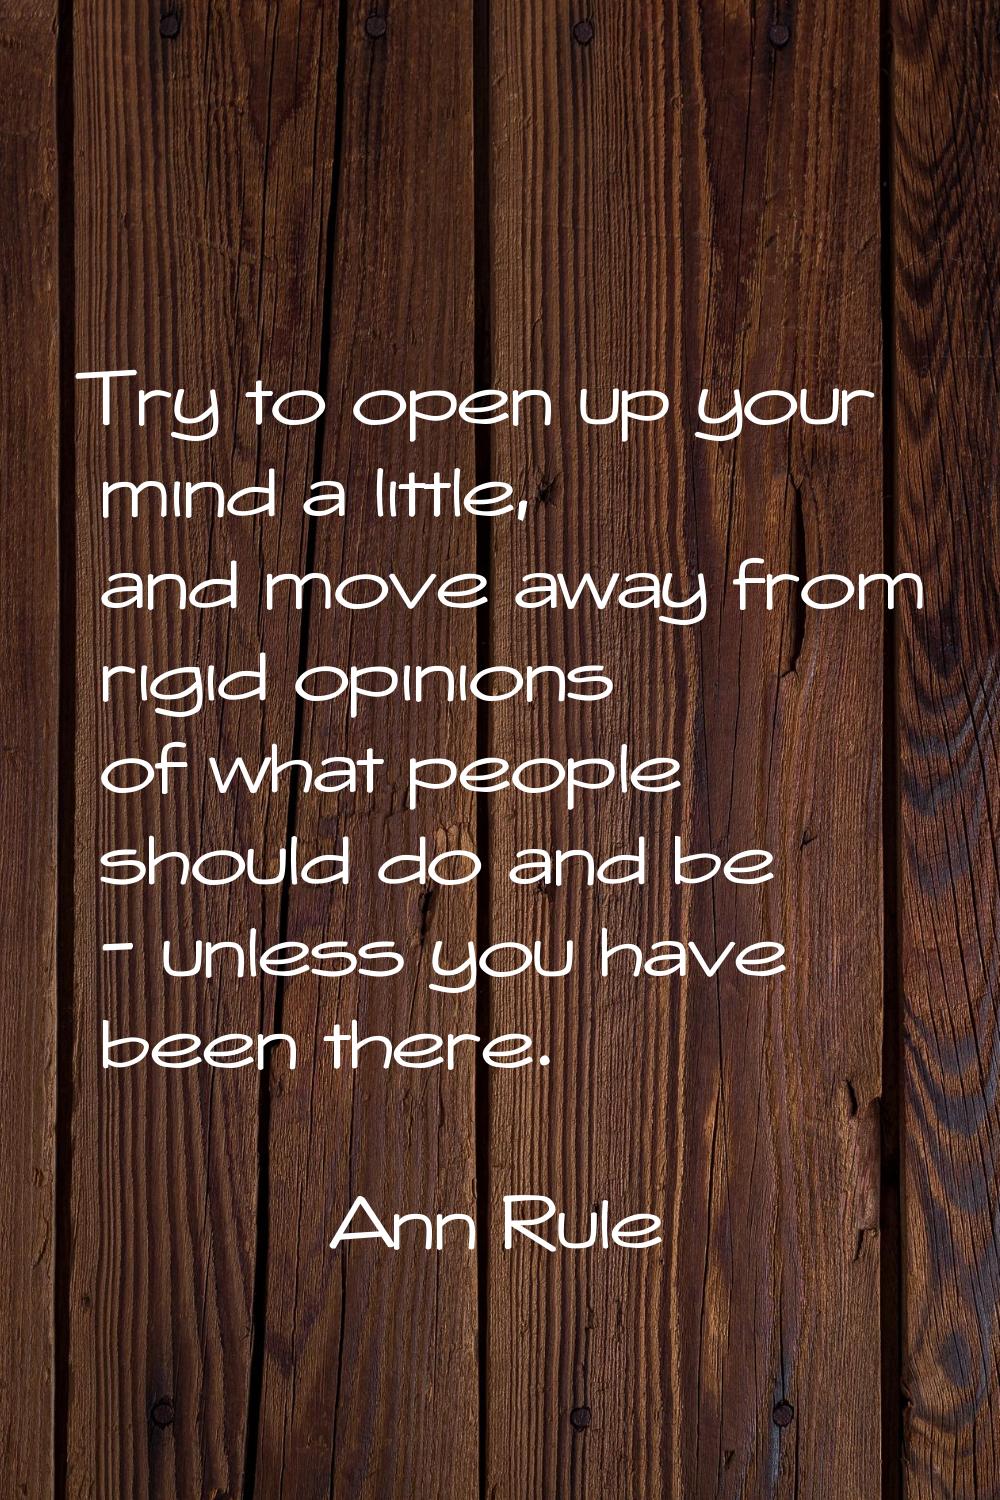 Try to open up your mind a little, and move away from rigid opinions of what people should do and b